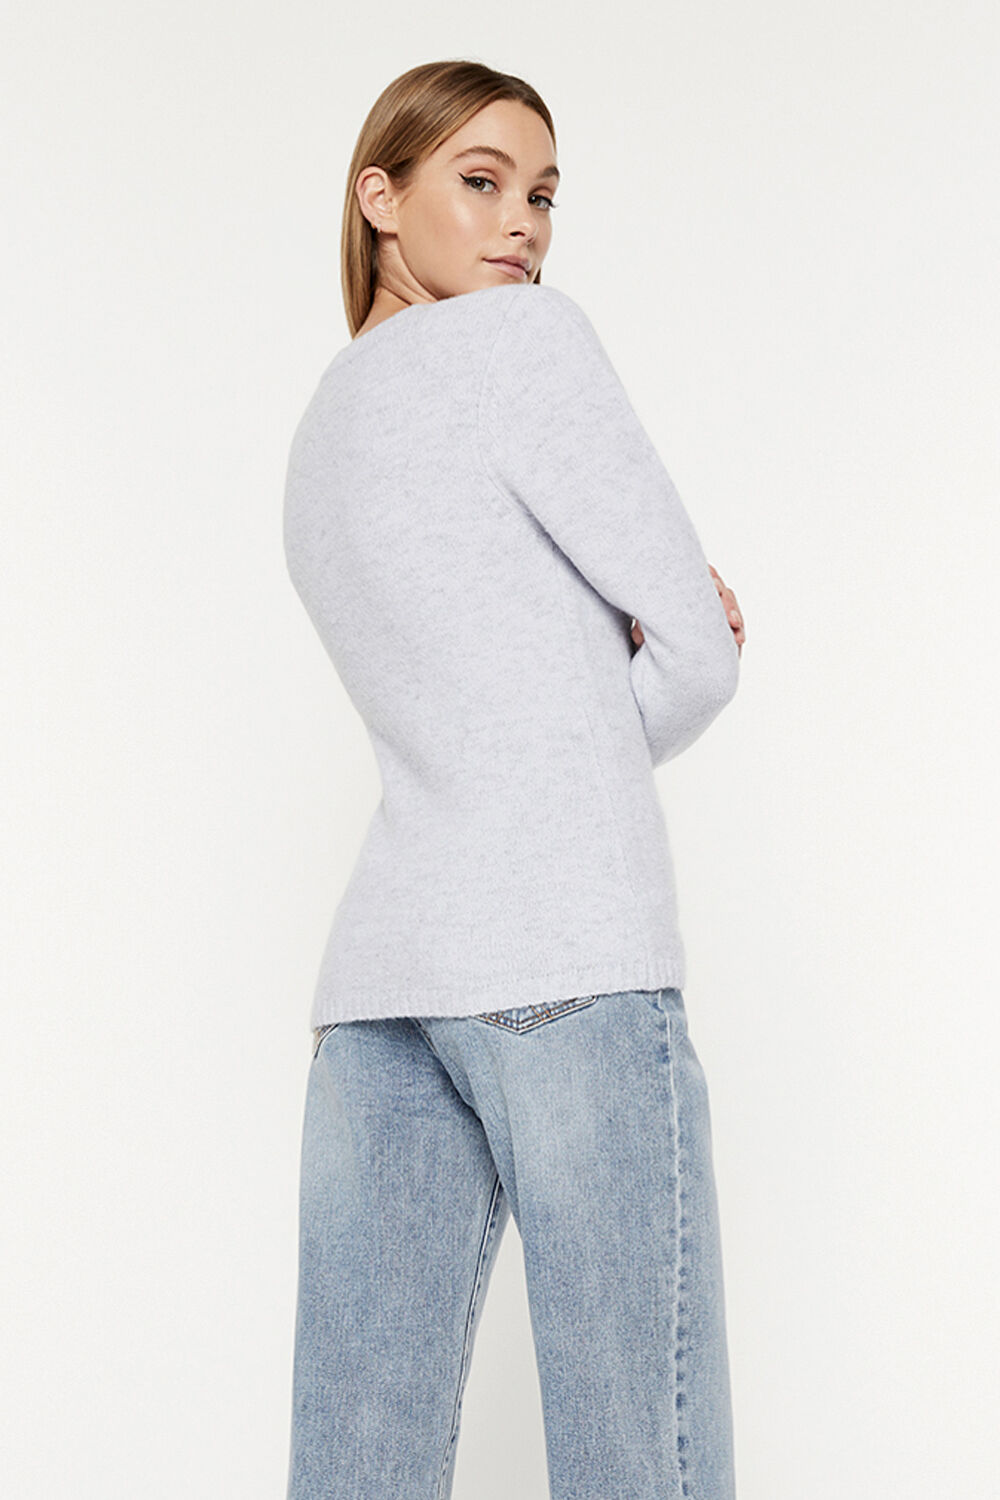 EVIE KNIT TOP in colour MOONLIGHT BLUE